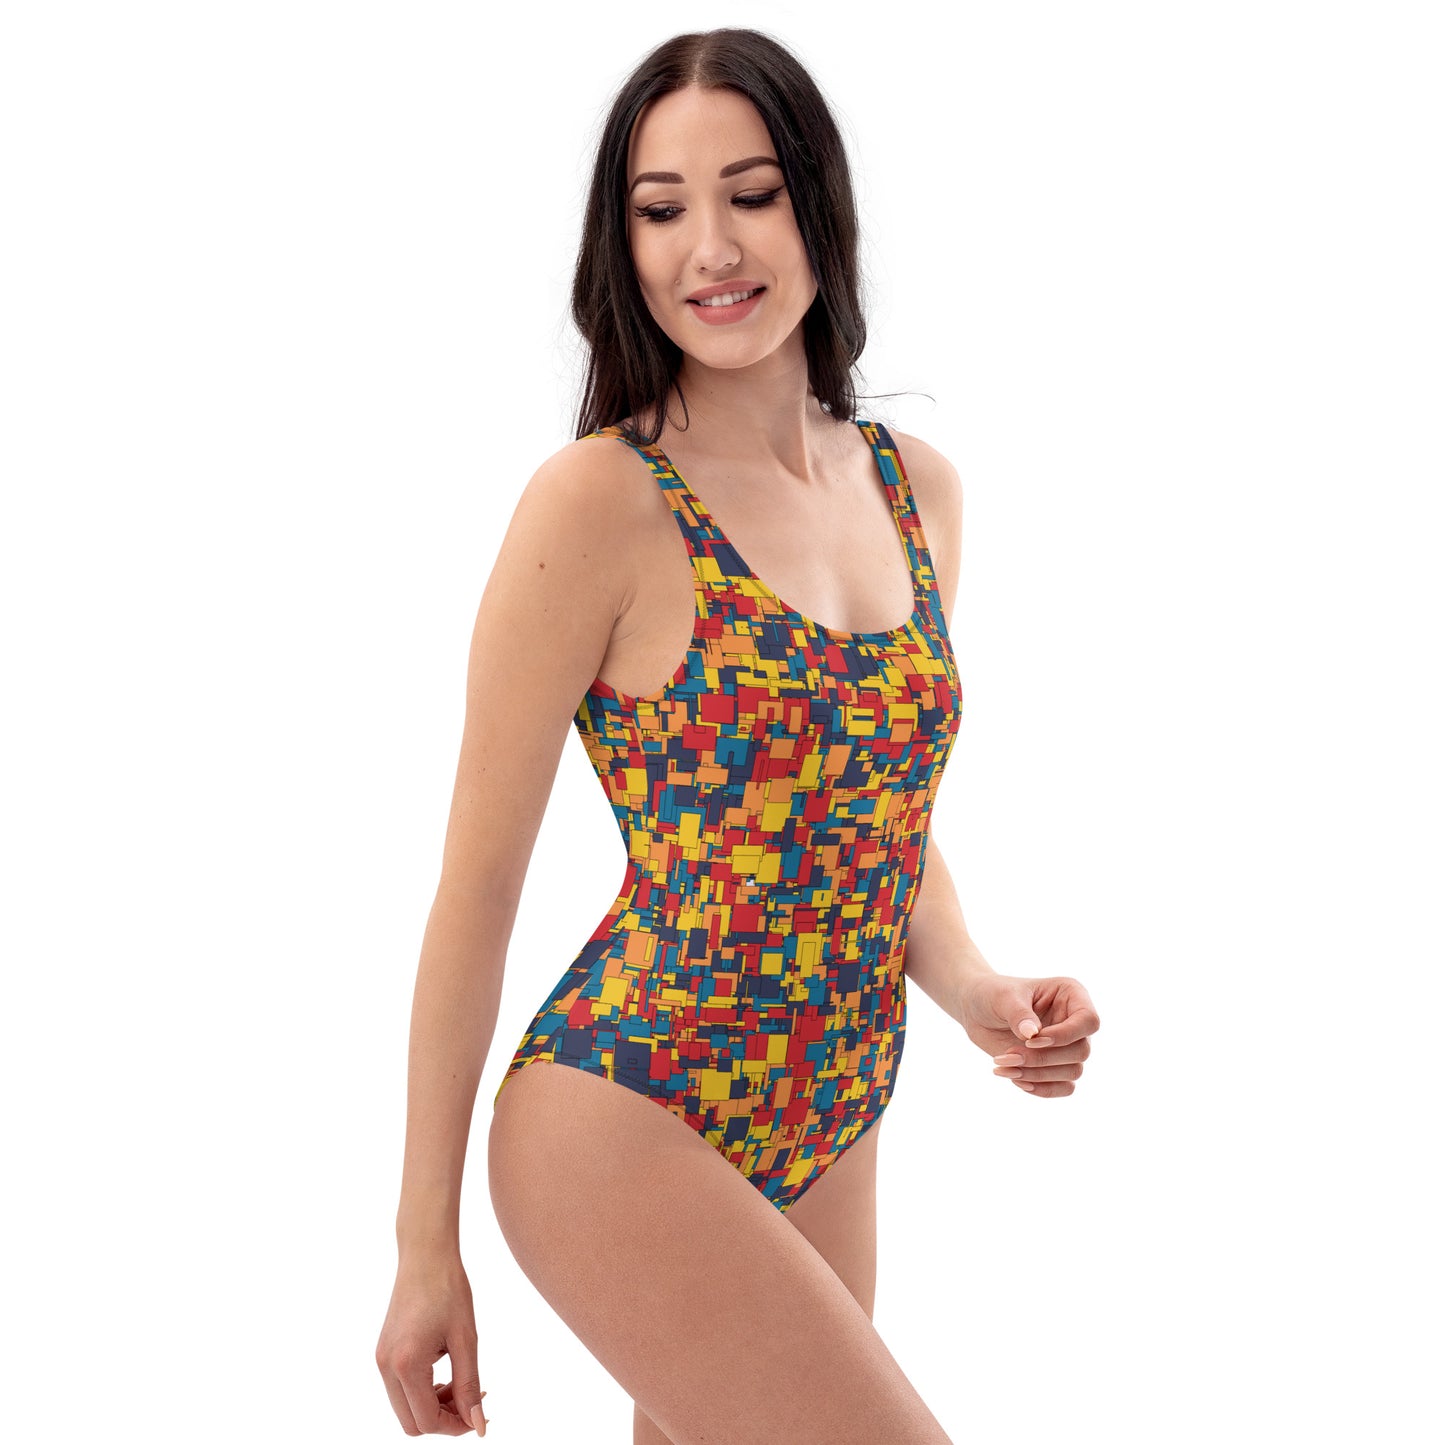 Be Bold and Beautiful with Our Vibrant Patterned Swimsuit - Make Waves this Season!